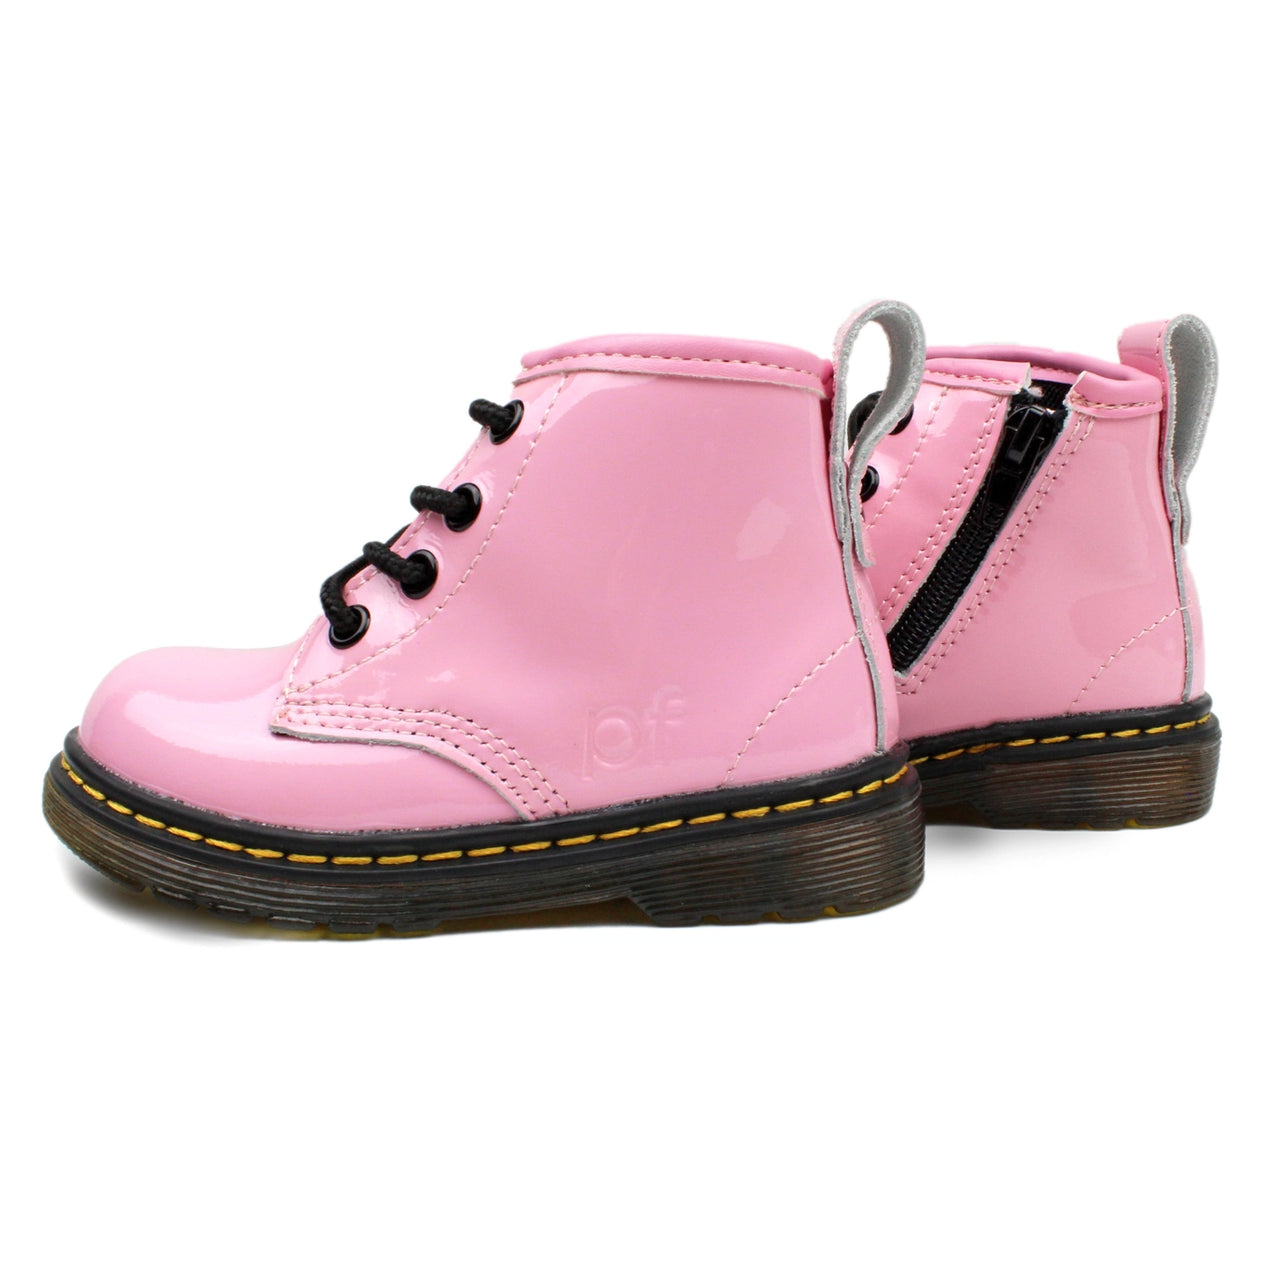 Cotton Candy Combat Boot